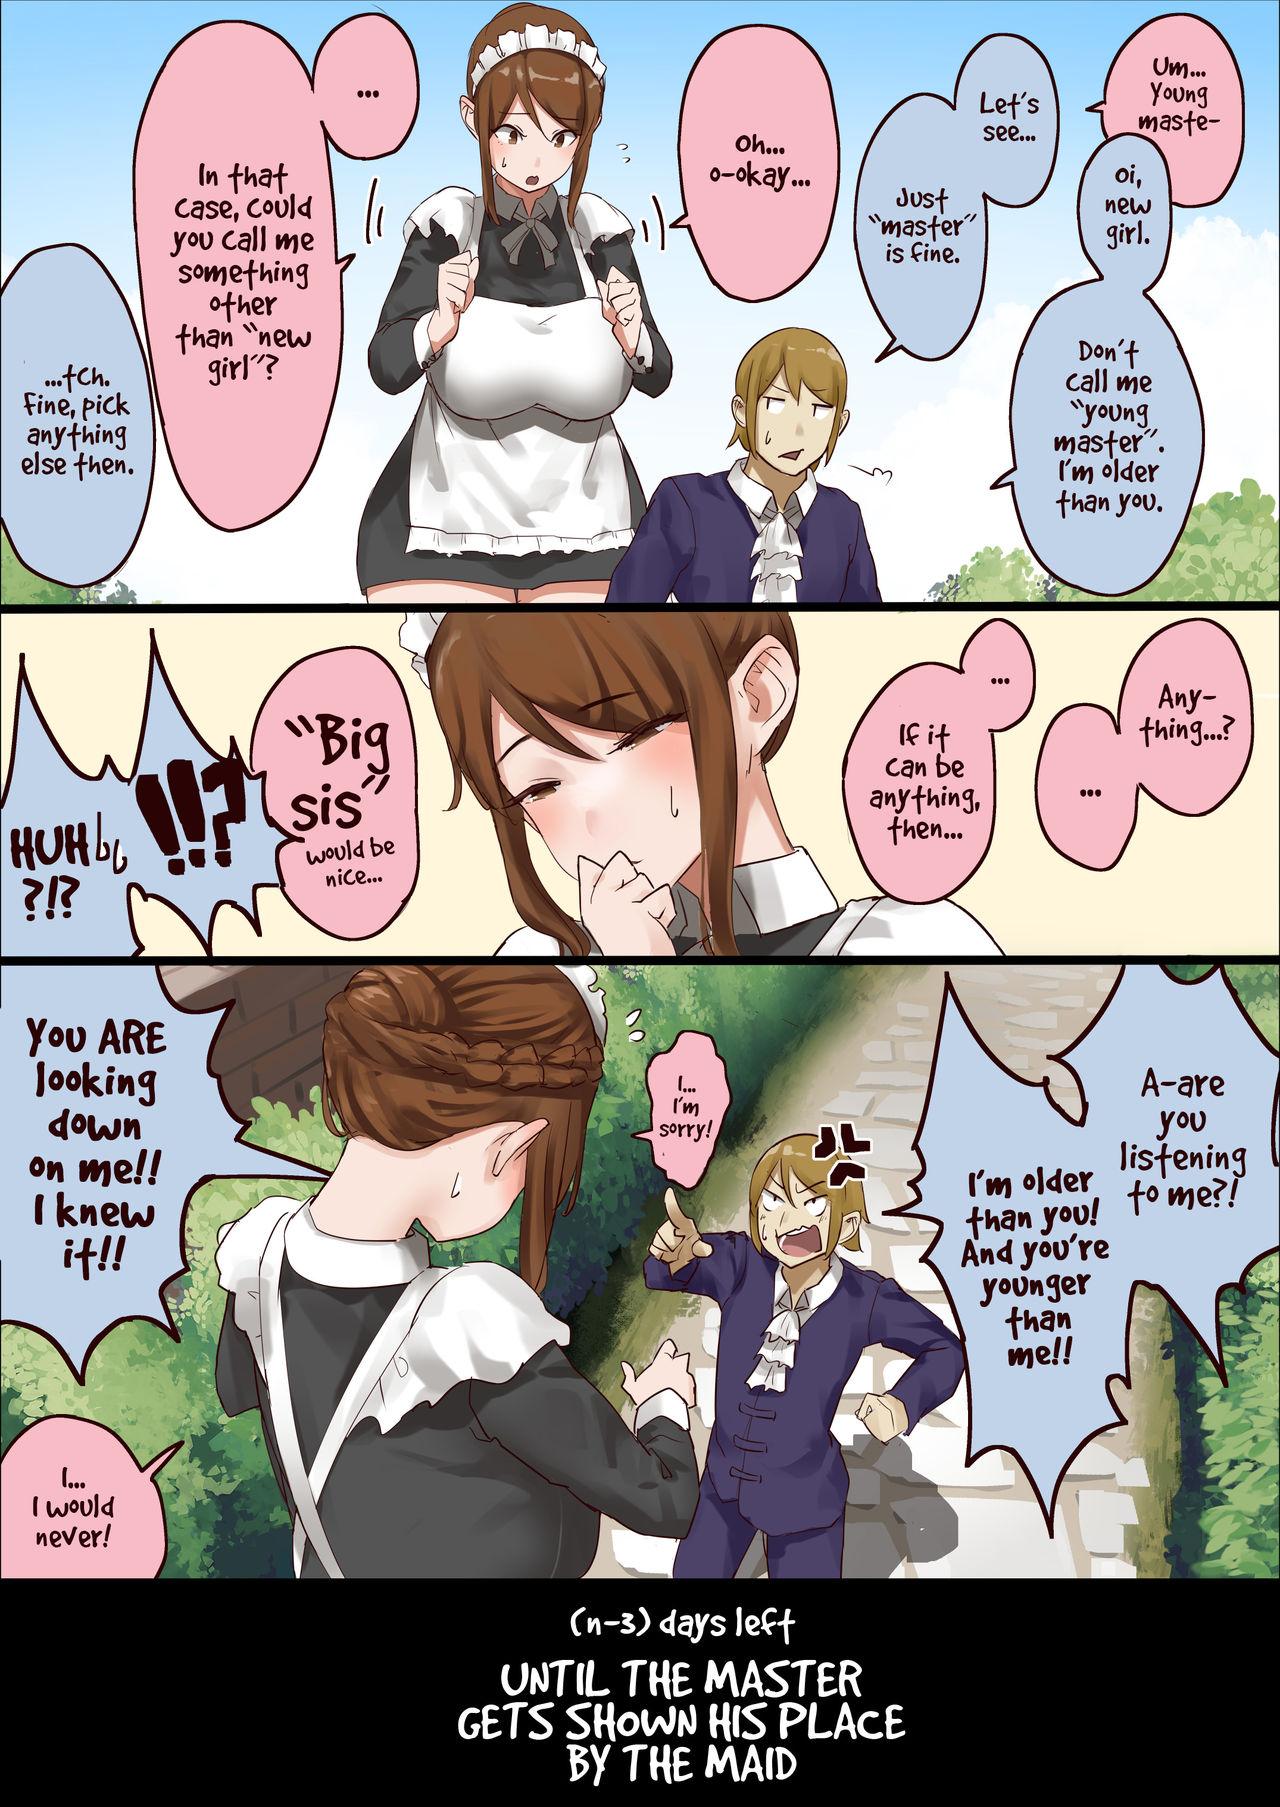 Butts master and maid - Original High Definition - Page 4